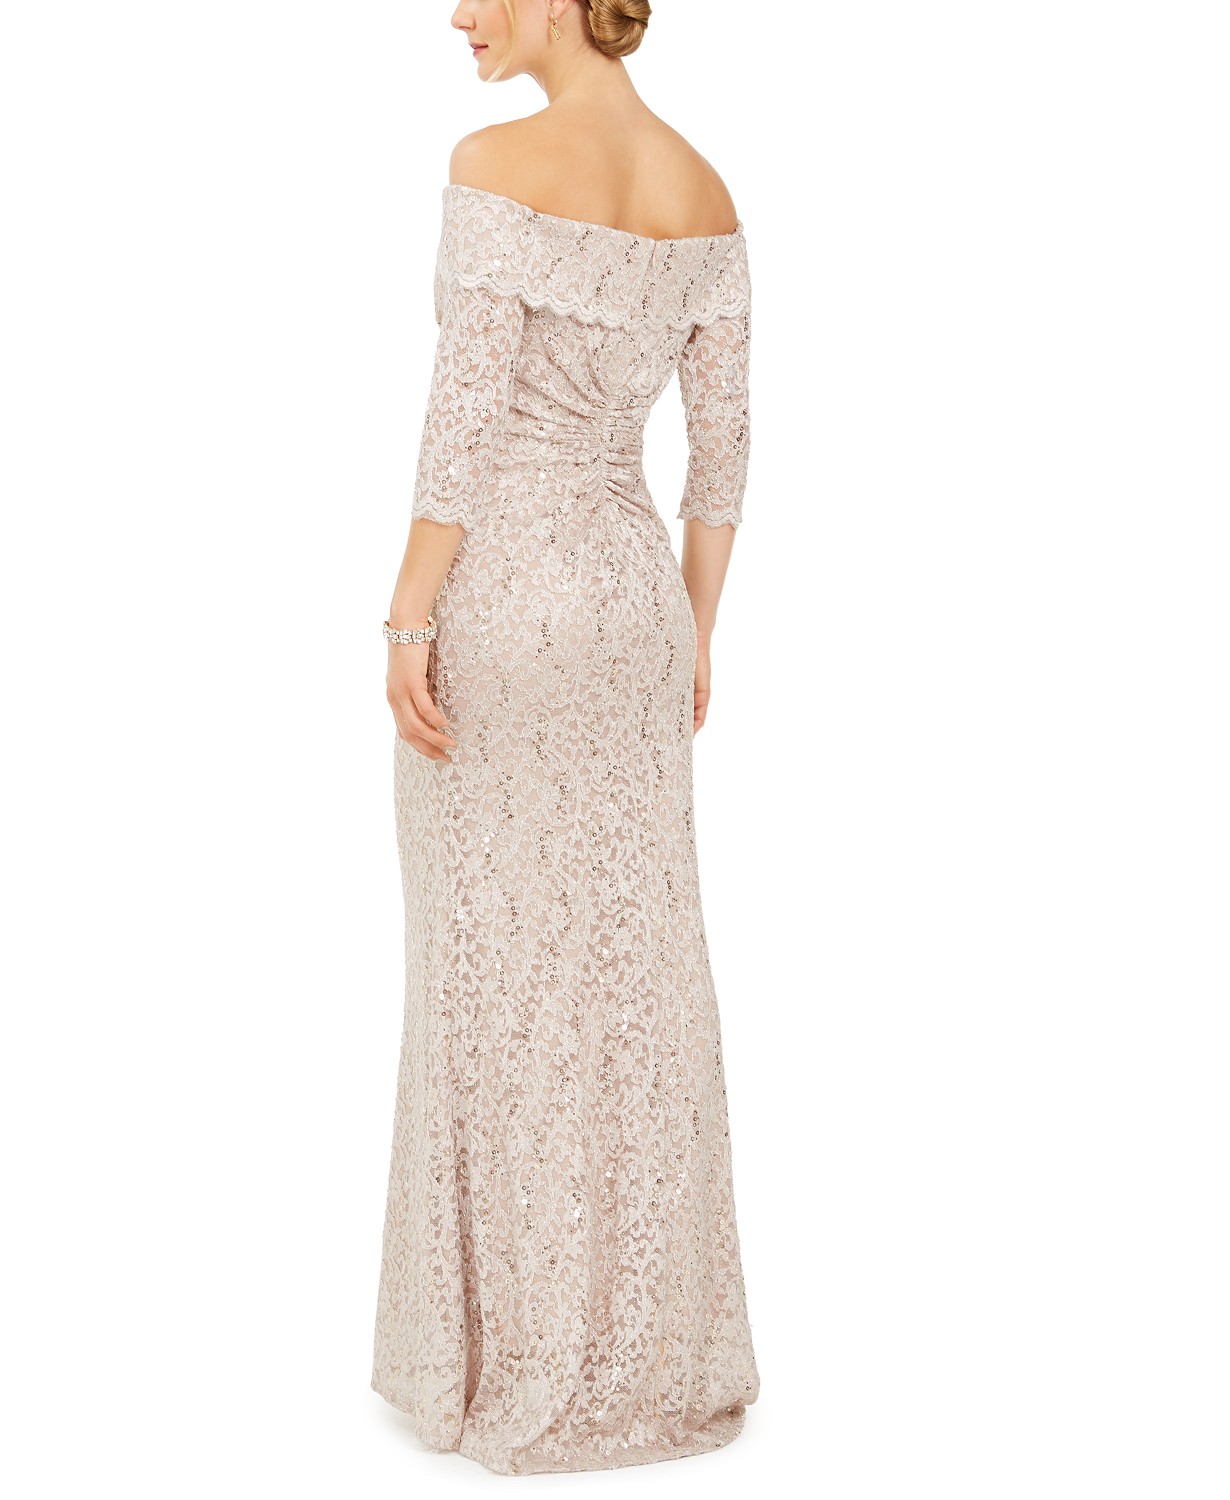 woocommerce-673321-2209615.cloudwaysapps.com-vince-camuto-womens-beige-glitter-off-the-shoulder-gown-dress